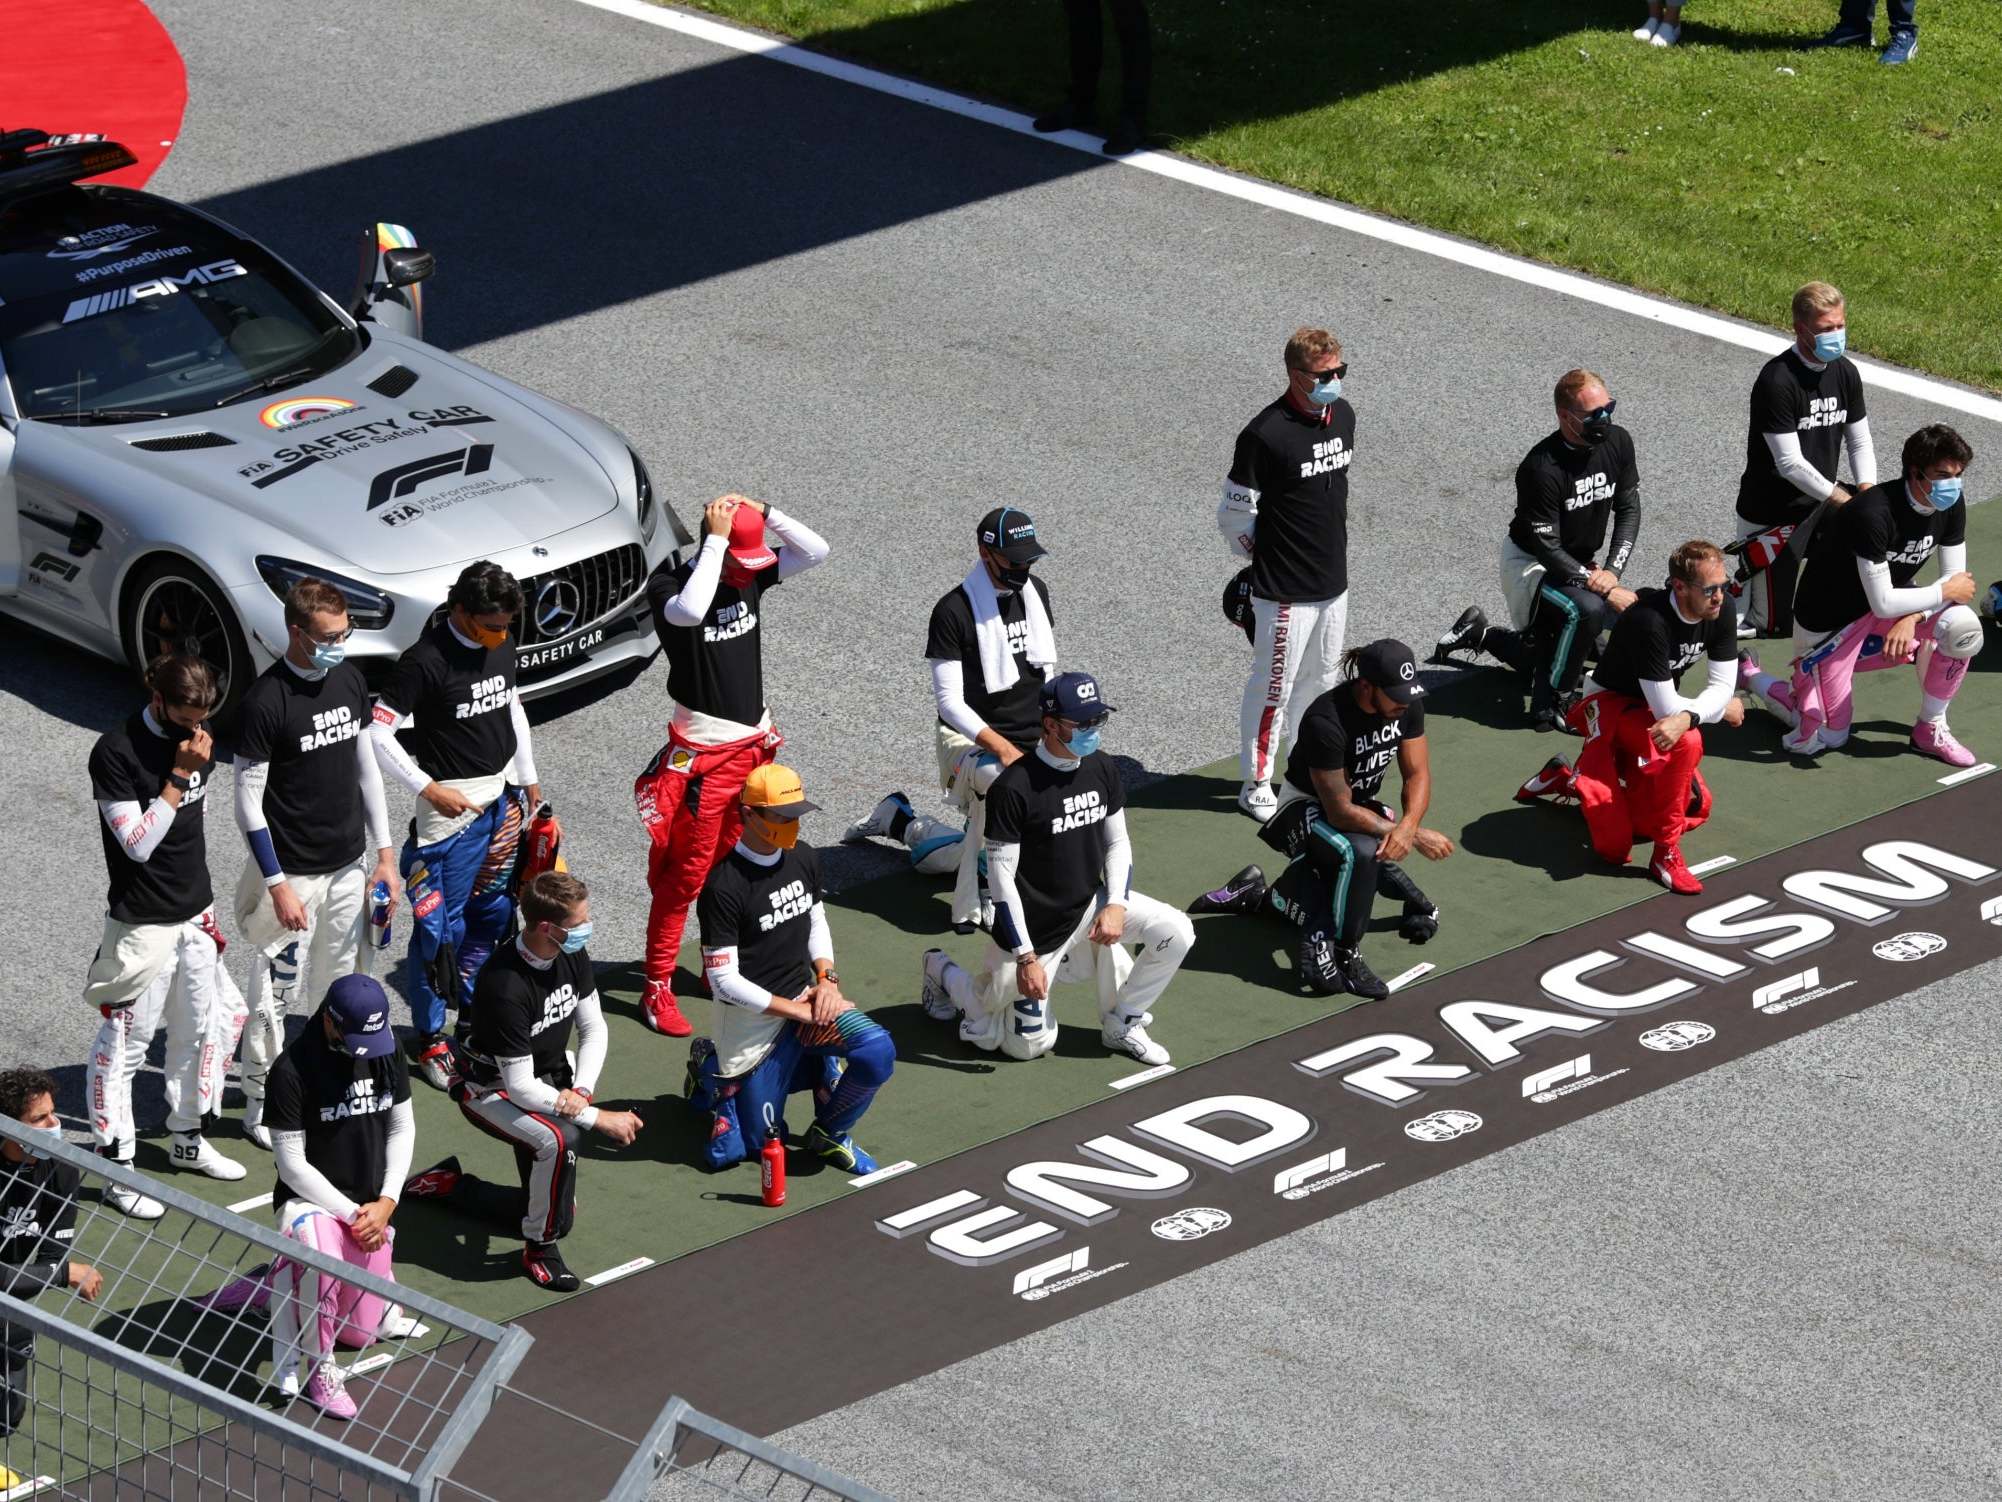 The six F1 drivers who chose not to stand made a mockery of the #WeRaceAsOne slogan